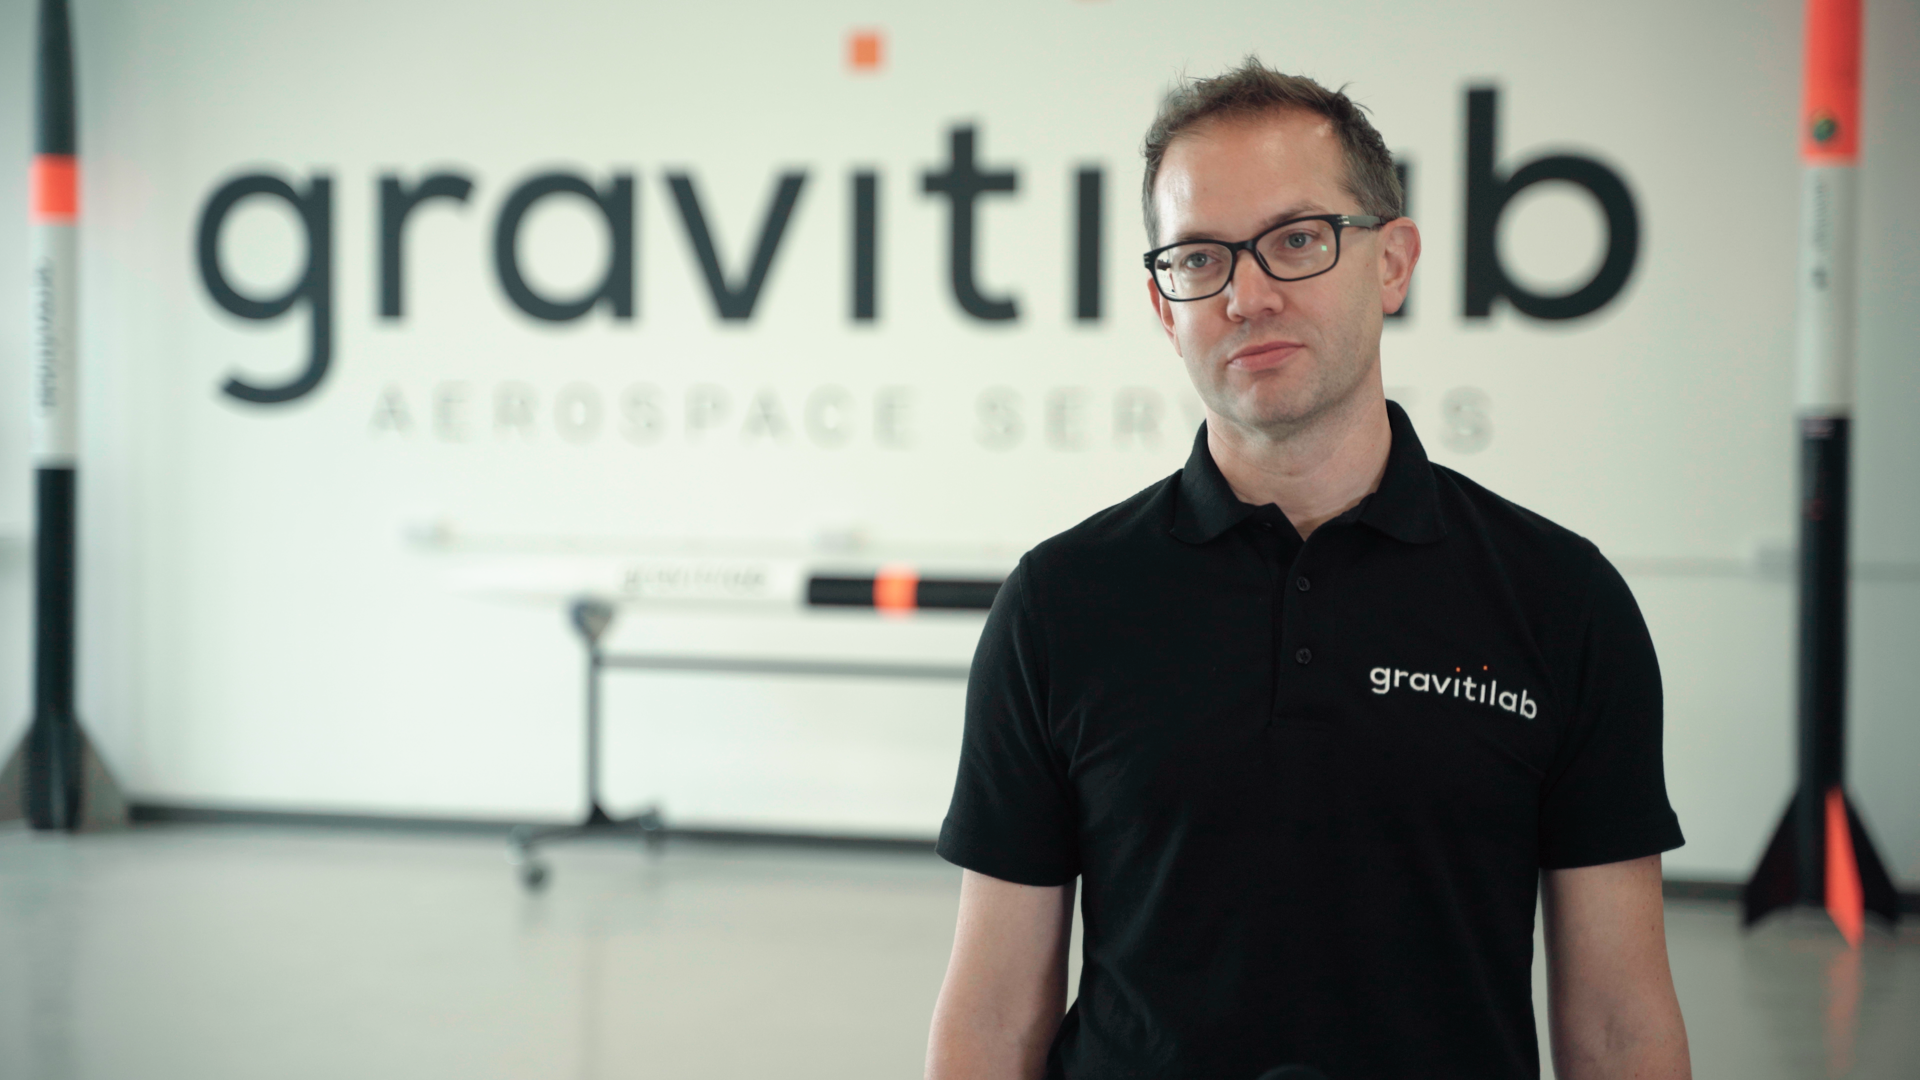 Space services startup Gravitilab receives £100k investment from British Design Fund